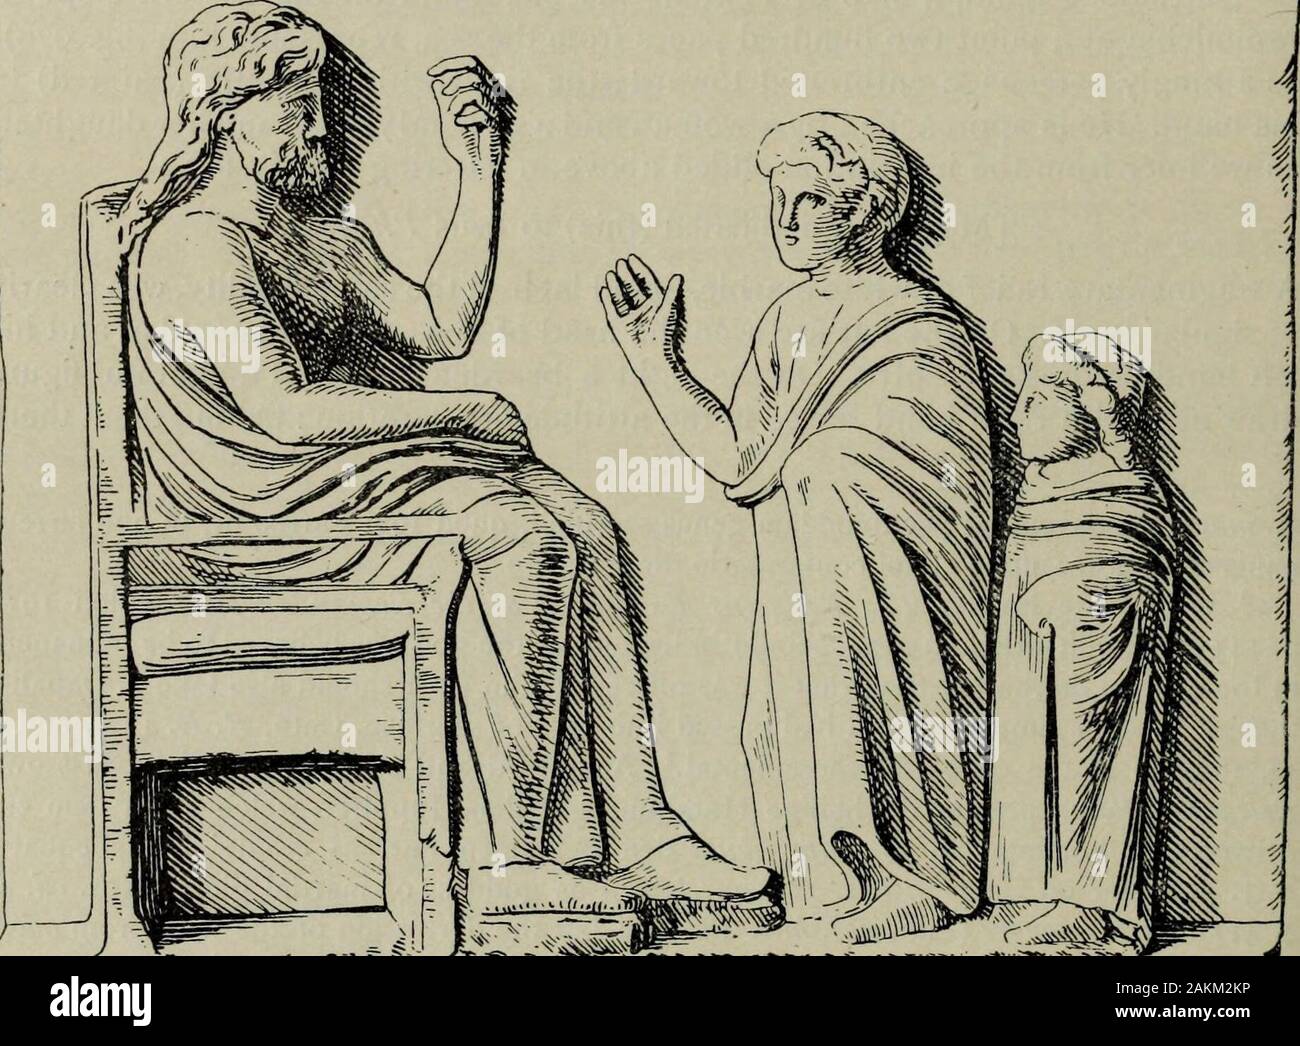 Zeus : a study in ancient religion . clean in J. Hastings Encyclo-pedia of Religion and Ethics Edinburgh 1908 i. 166—175. ^ Supra p. 1104. ^ R. Schone Griechische Reliefs Leipzig 1872 p. 53 f. no. 105 pi. 25, Friederichs—^Wolters Gipsahgiisse ^. 370 no. 1128, Einzelaufnahmen no. 1247, 2 with Text v. 22 byE. Lowy, Svoronos Ath. Nationalmus. p. 354 f. no. 1405 pi. 59 ( = my fig. 976), ReinachR^p. Reliefs ii. 362, 7 (wrongly described ib. p. 363 as Hommage a Zeus Meilichios).Height 0*22, breadth 0*21^. 5 Corp inscr. Att. ii. 3 no. 1572 [M]YNNIONAl 101AIHIANE0[HKEN] = [MJwjioi Ad ^tXiwi a.vkQj]Ke Stock Photo